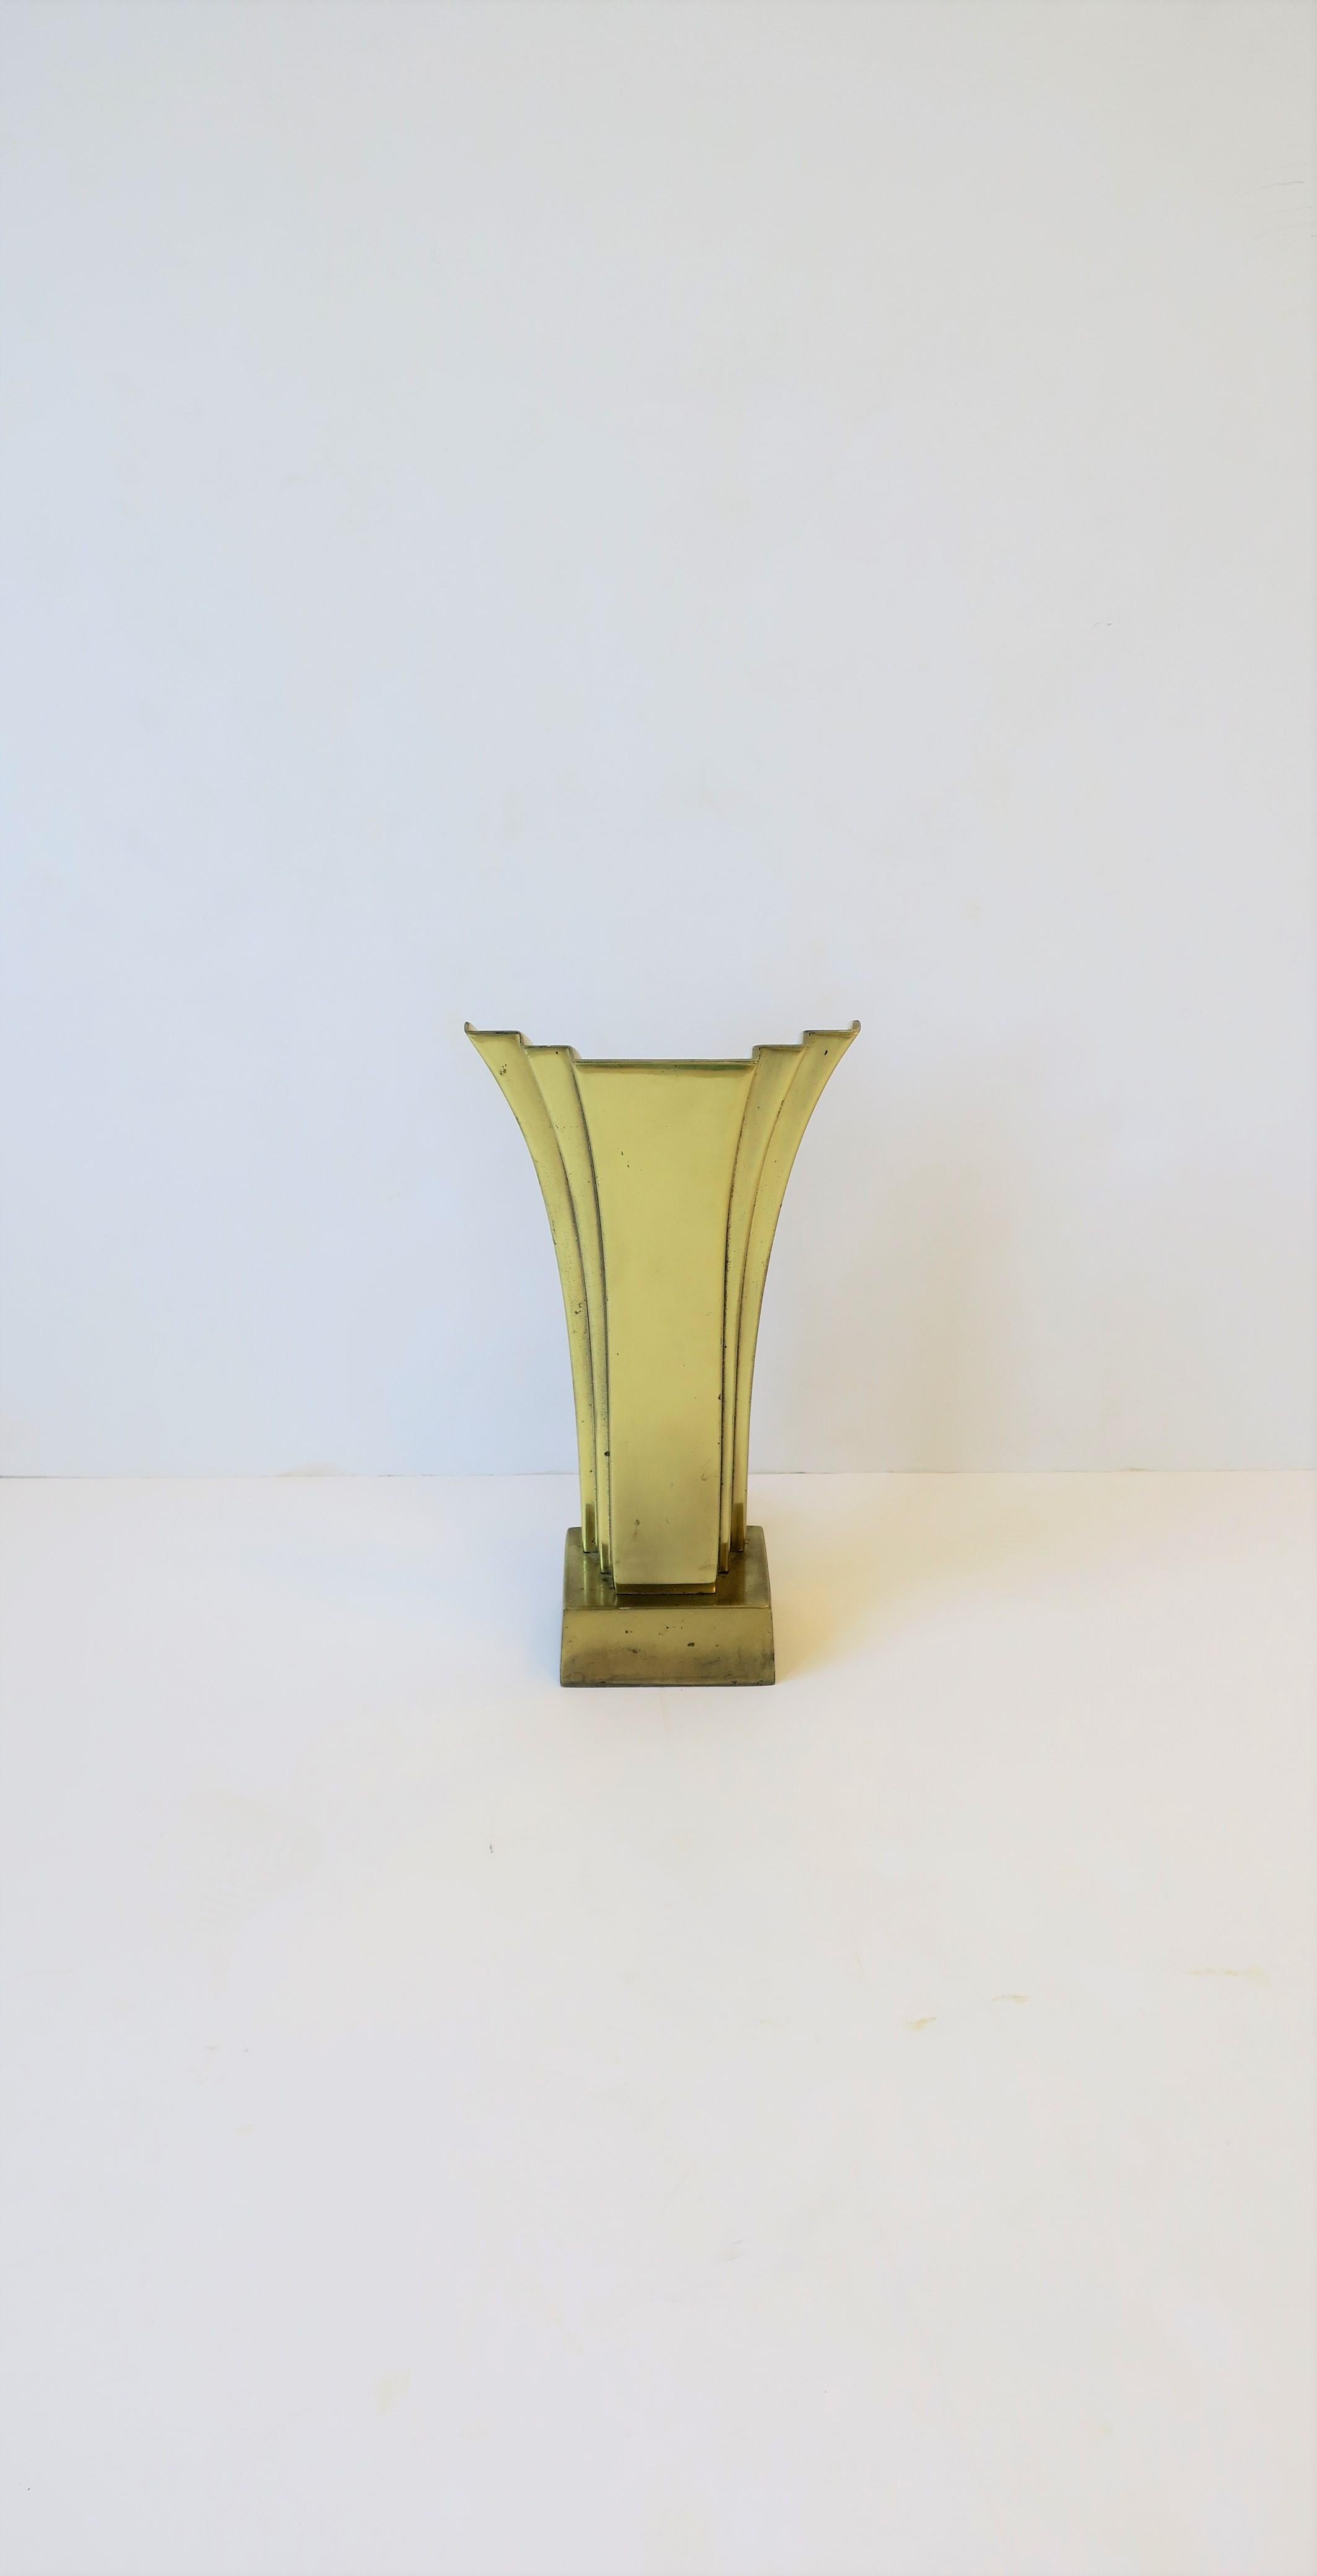 A beautiful and substantial Art Deco style brass desk or table lamp, circa 1970s. Lamp has a beautiful, graduated design, a detail reminiscent during the Art Deco period of the 1930s. Light resembles a wall sconce, however, it's a table lamp; on/off